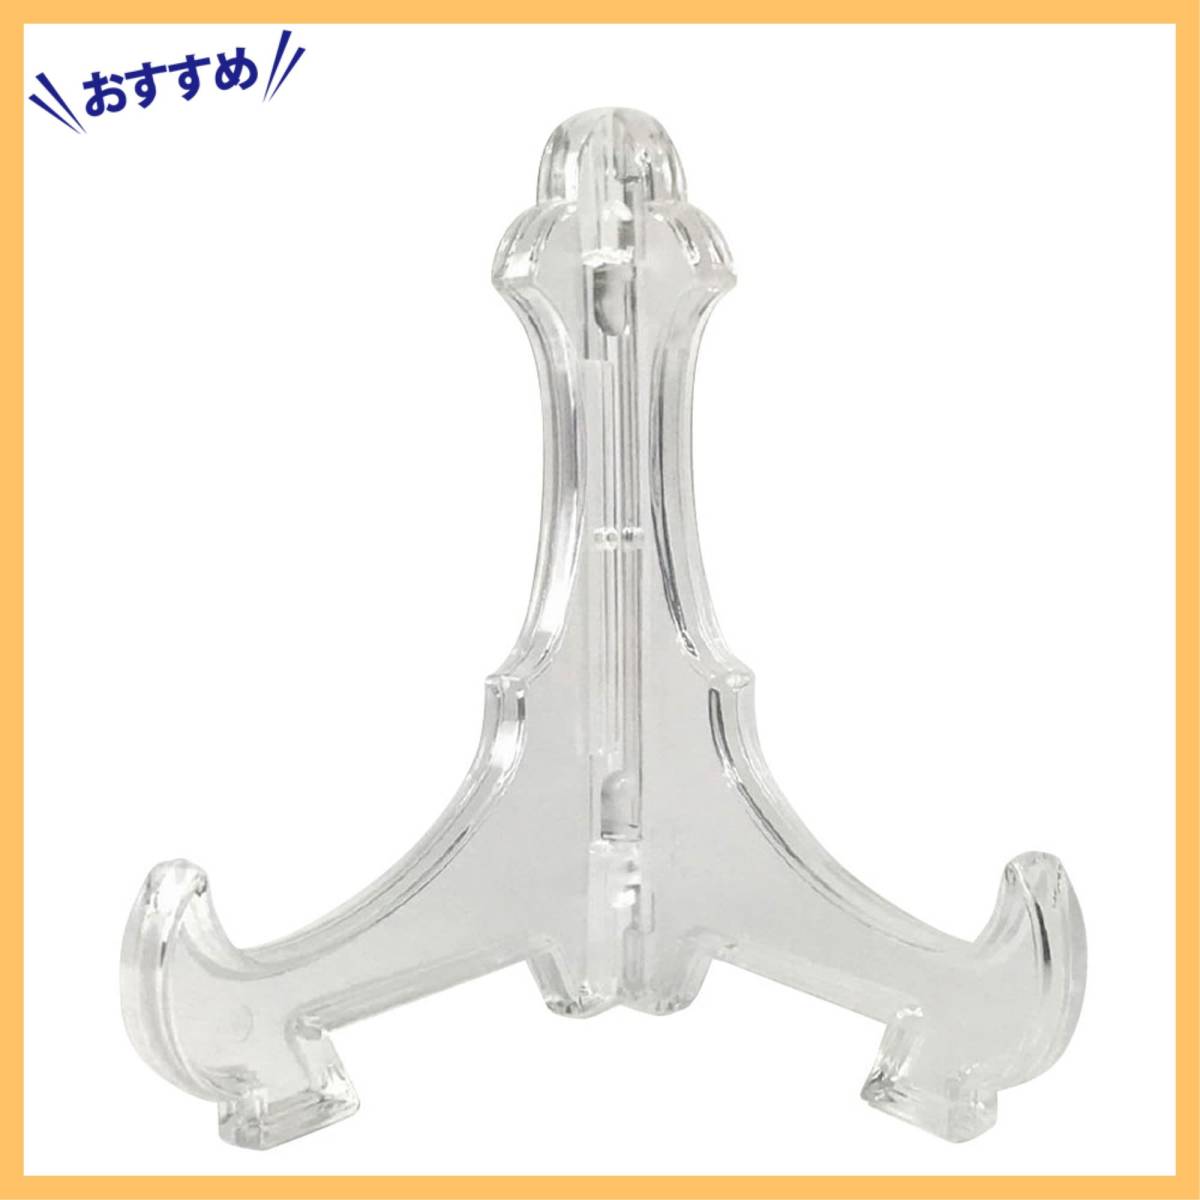 [ special price commodity ]*B5 width put possible amount establish easel (18cm~23cm degree . plate for )A5 lengthway . possible picture frame .. amount stand S5 plate establish 